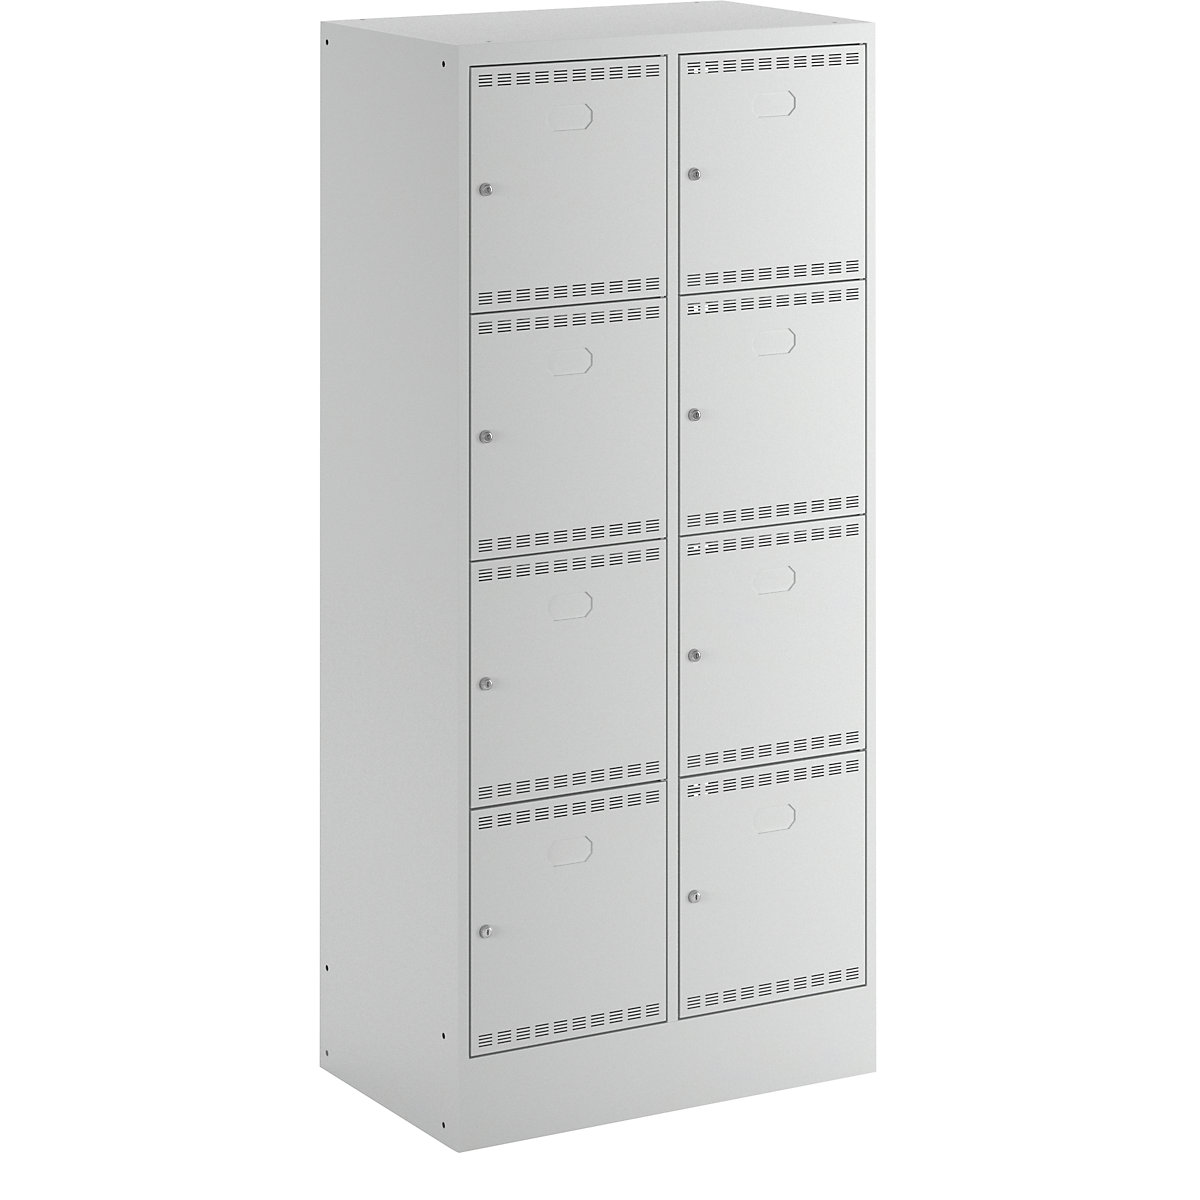 Battery charging cabinet with lockable compartments - LISTA